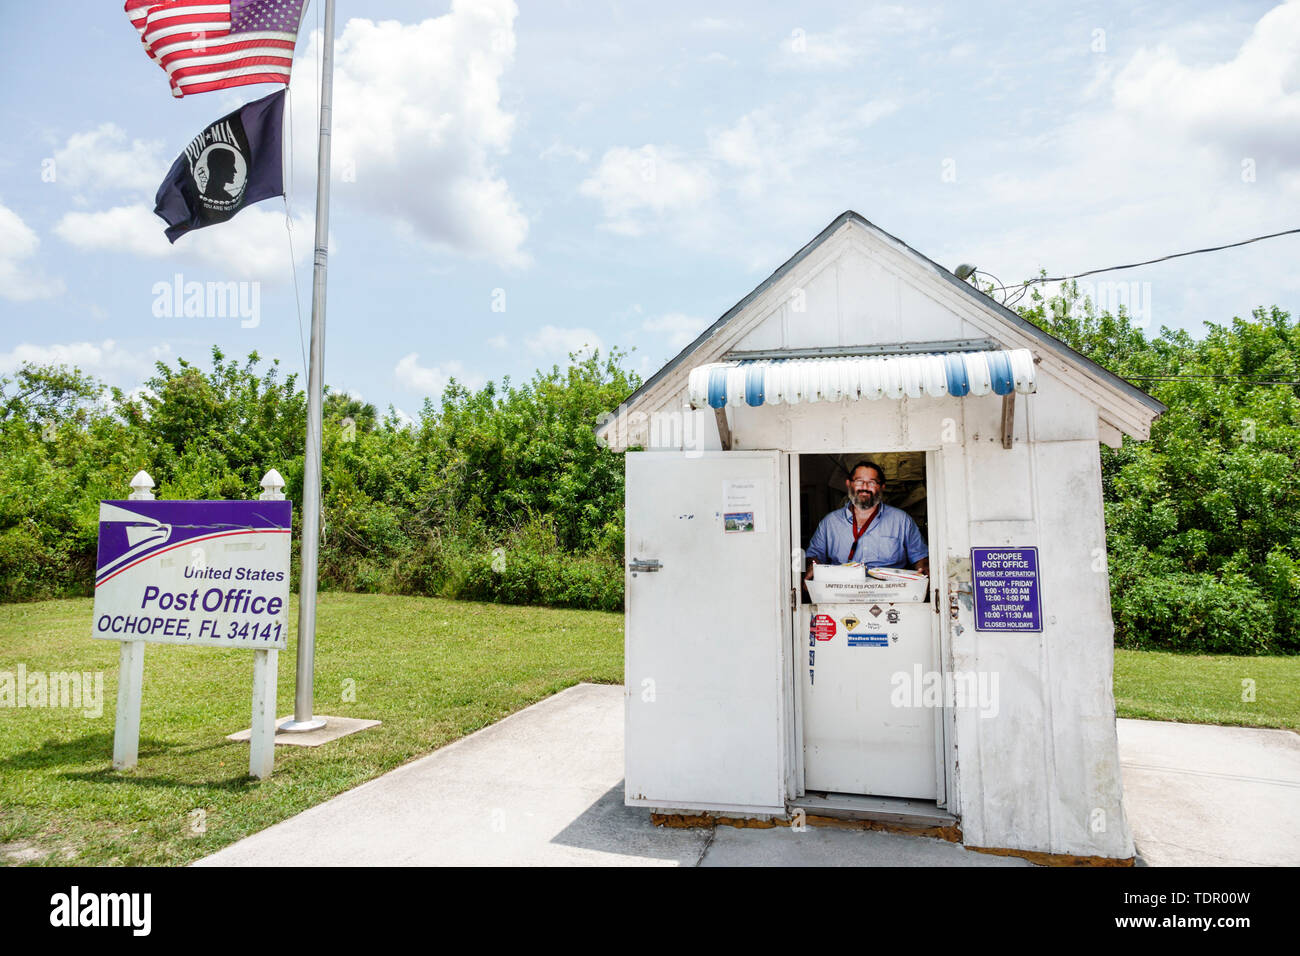 Florida,Ochopee,Everglades,Tamiami Trail,smallest post office,wood frame shed,post clerk,worker,man men male,service window,flag,FL190512074 Stock Photo